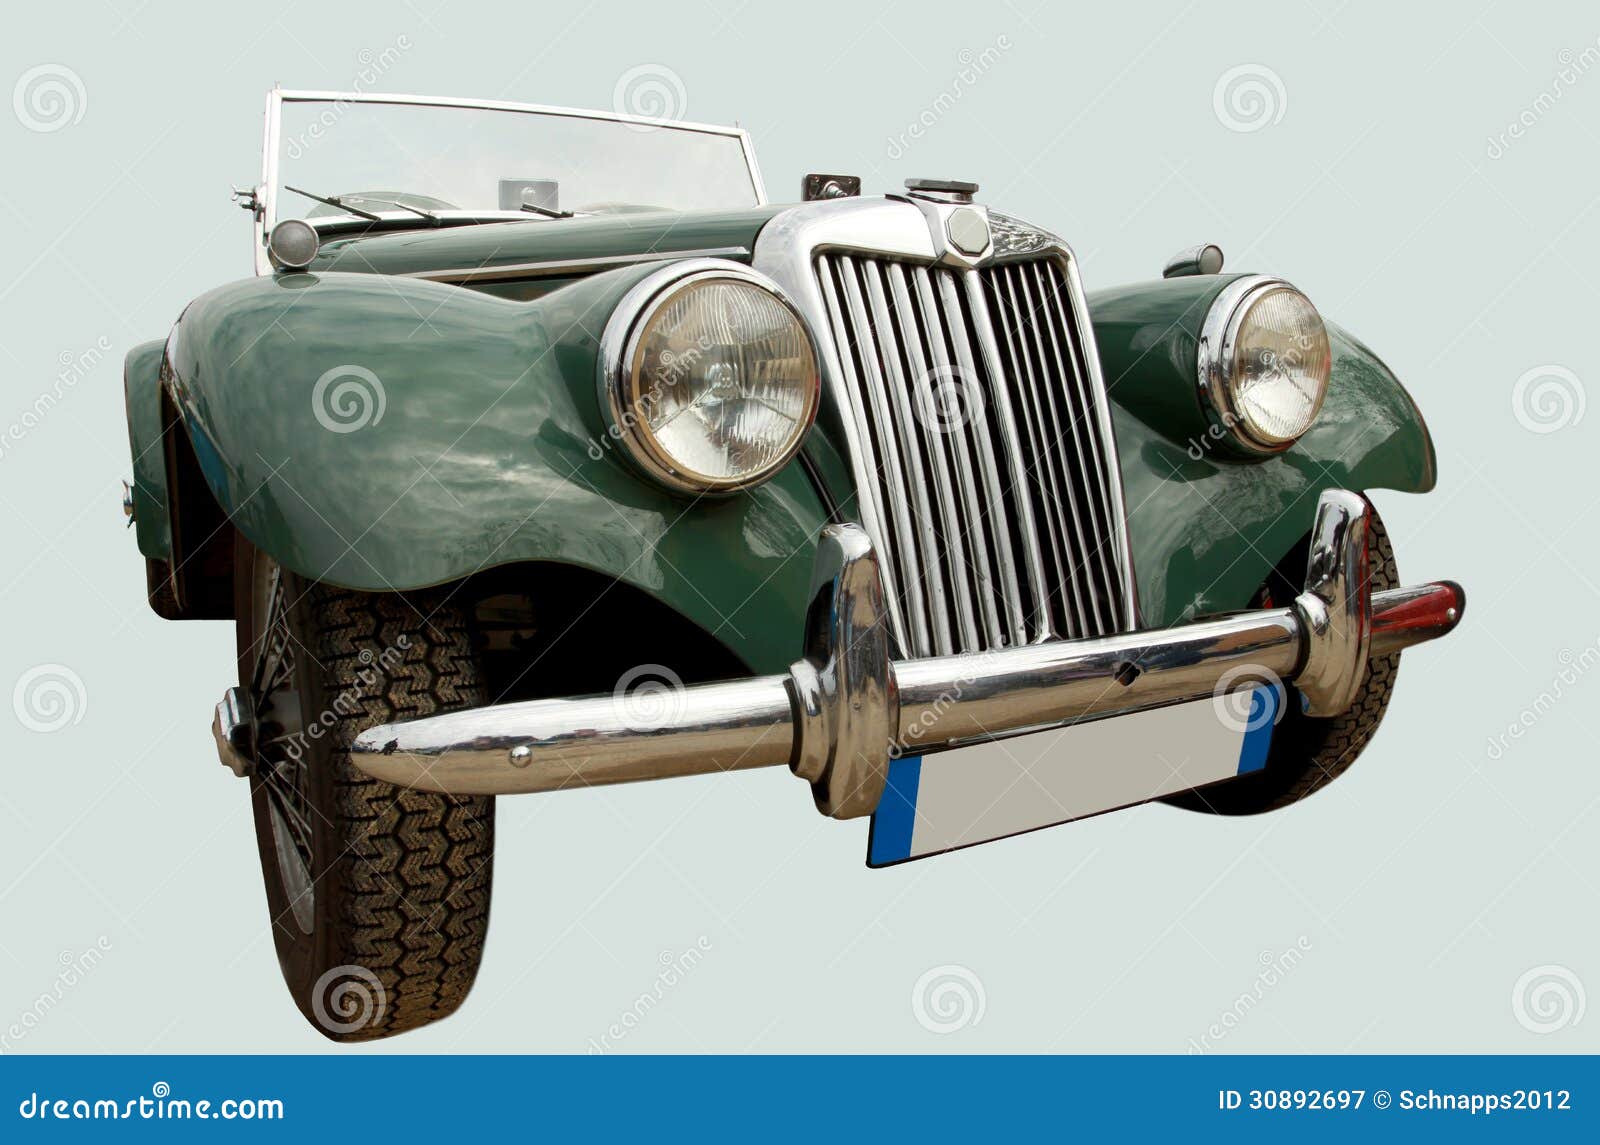 Vintage Sports Car Royalty Free Stock Photography  Image: 30892697